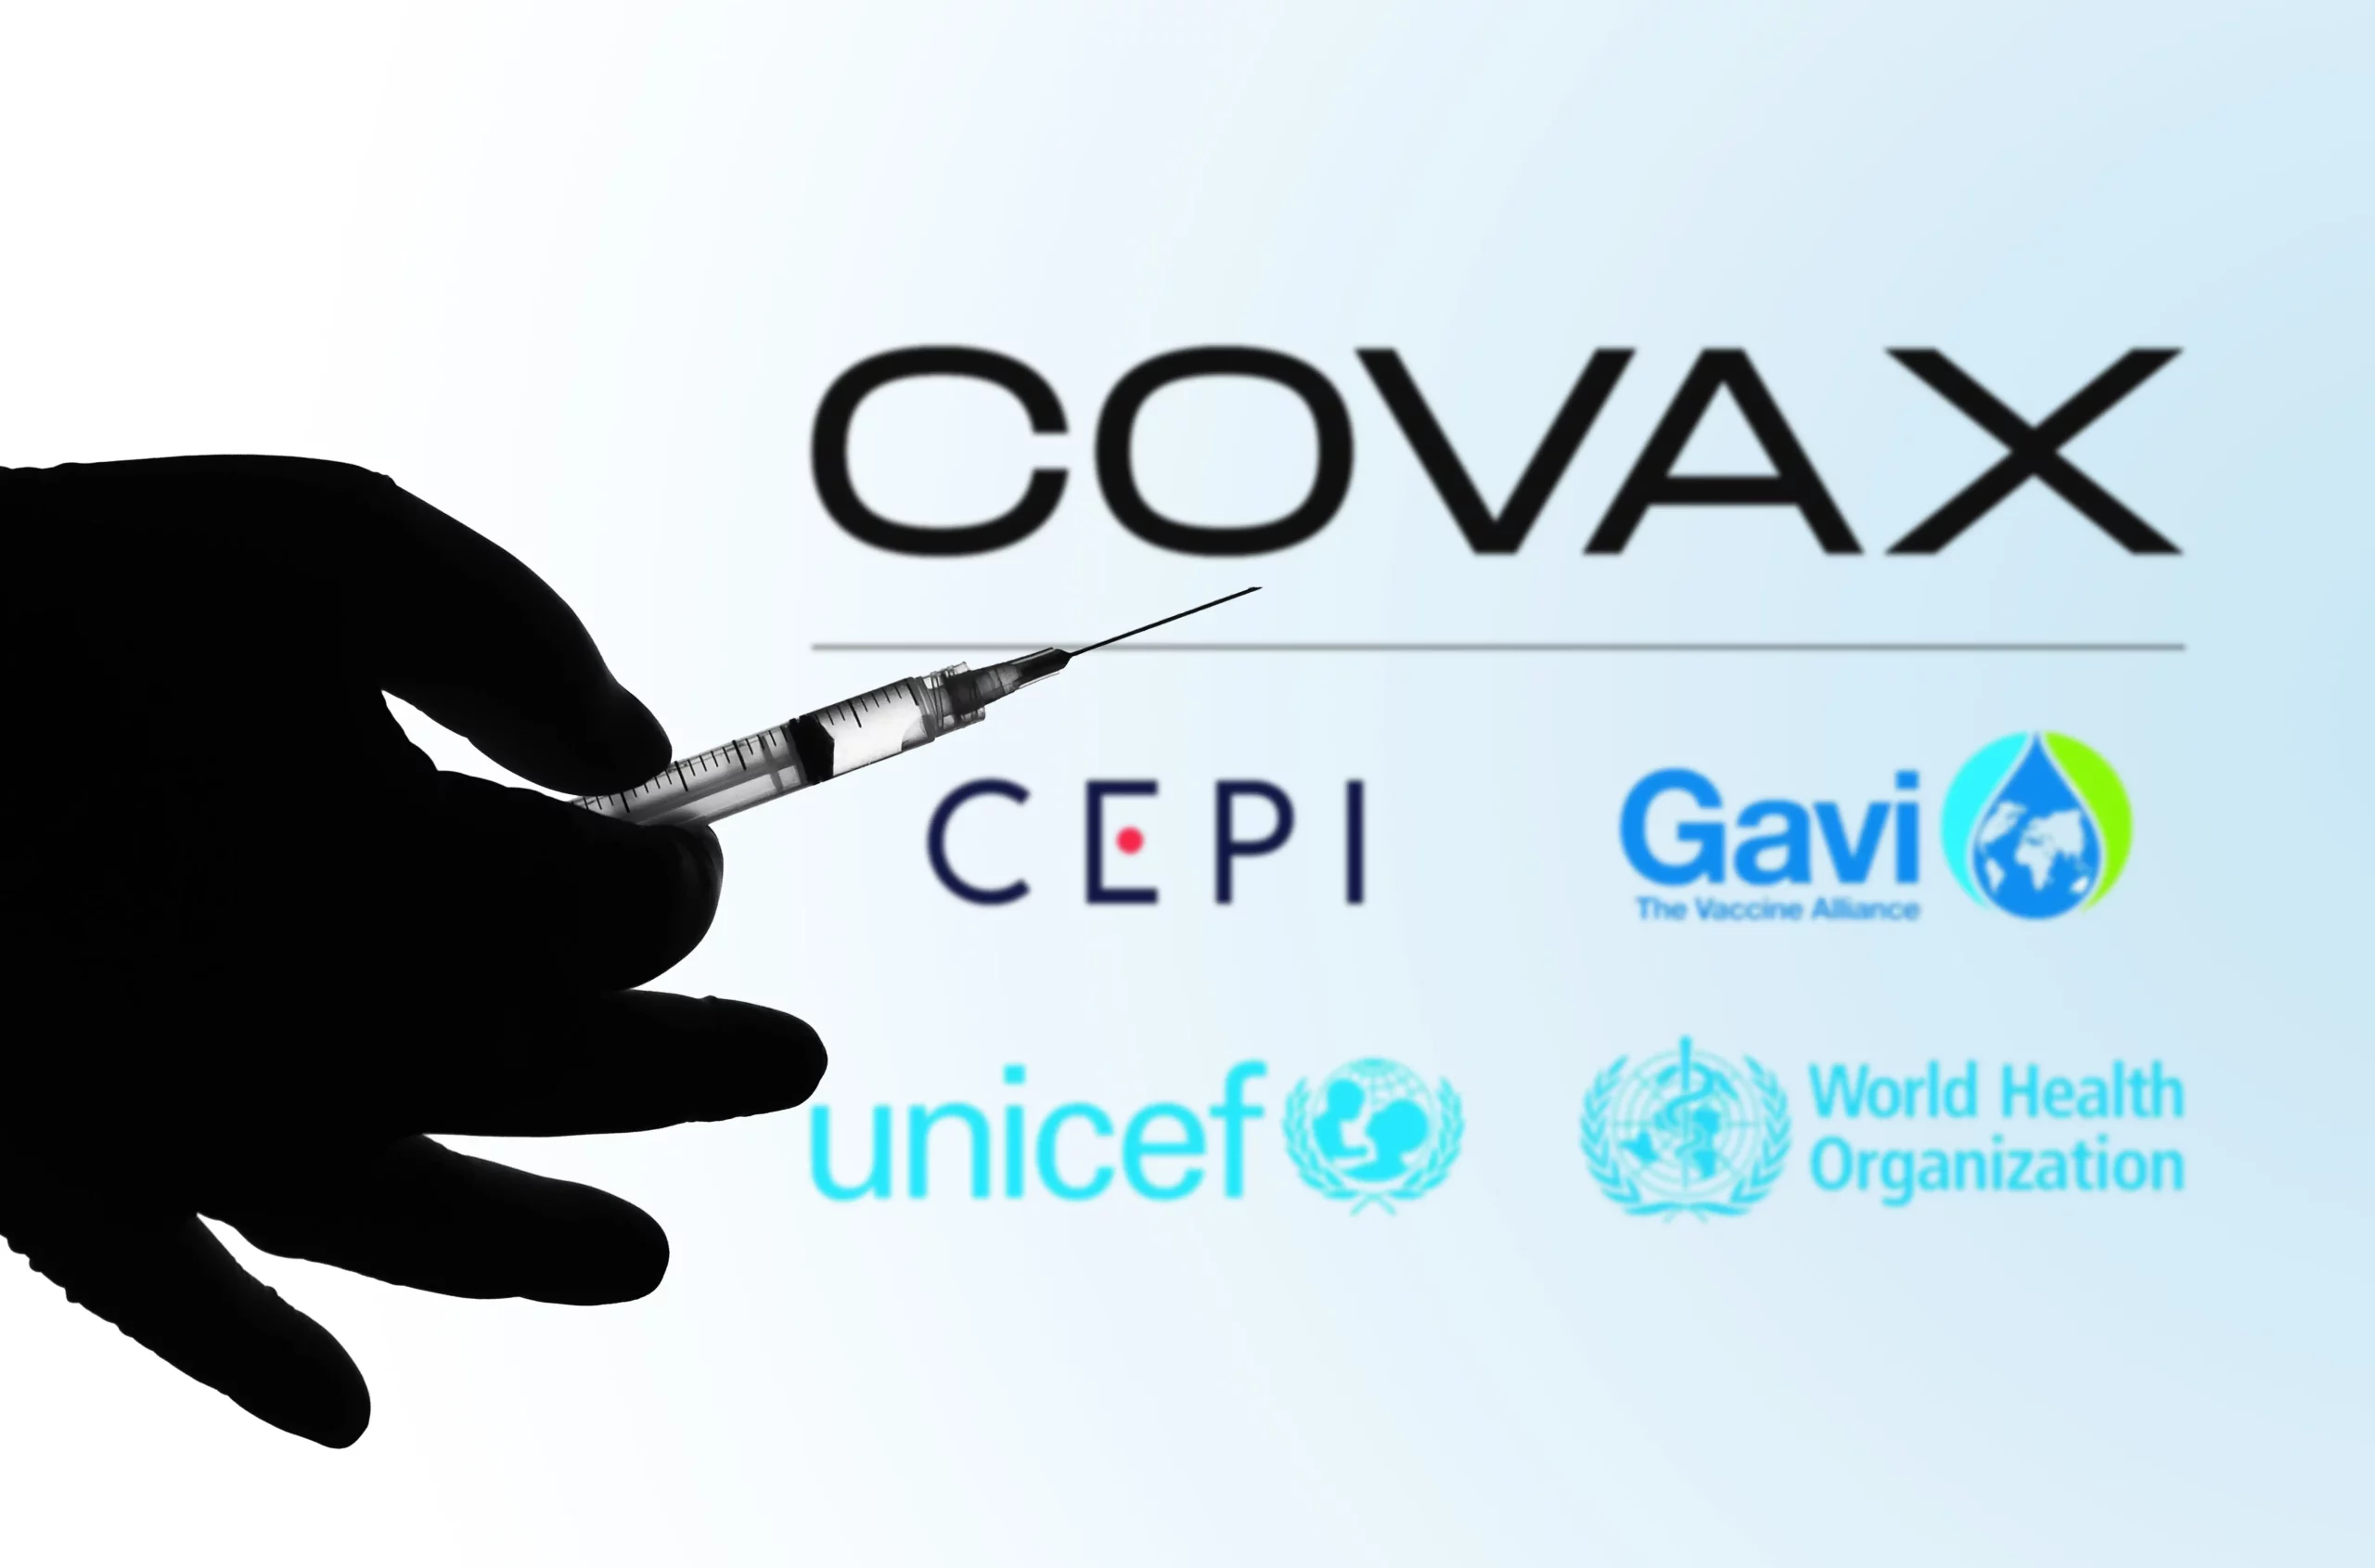 Covax deliveries in Rwanda pushed to more than 1 billion doses